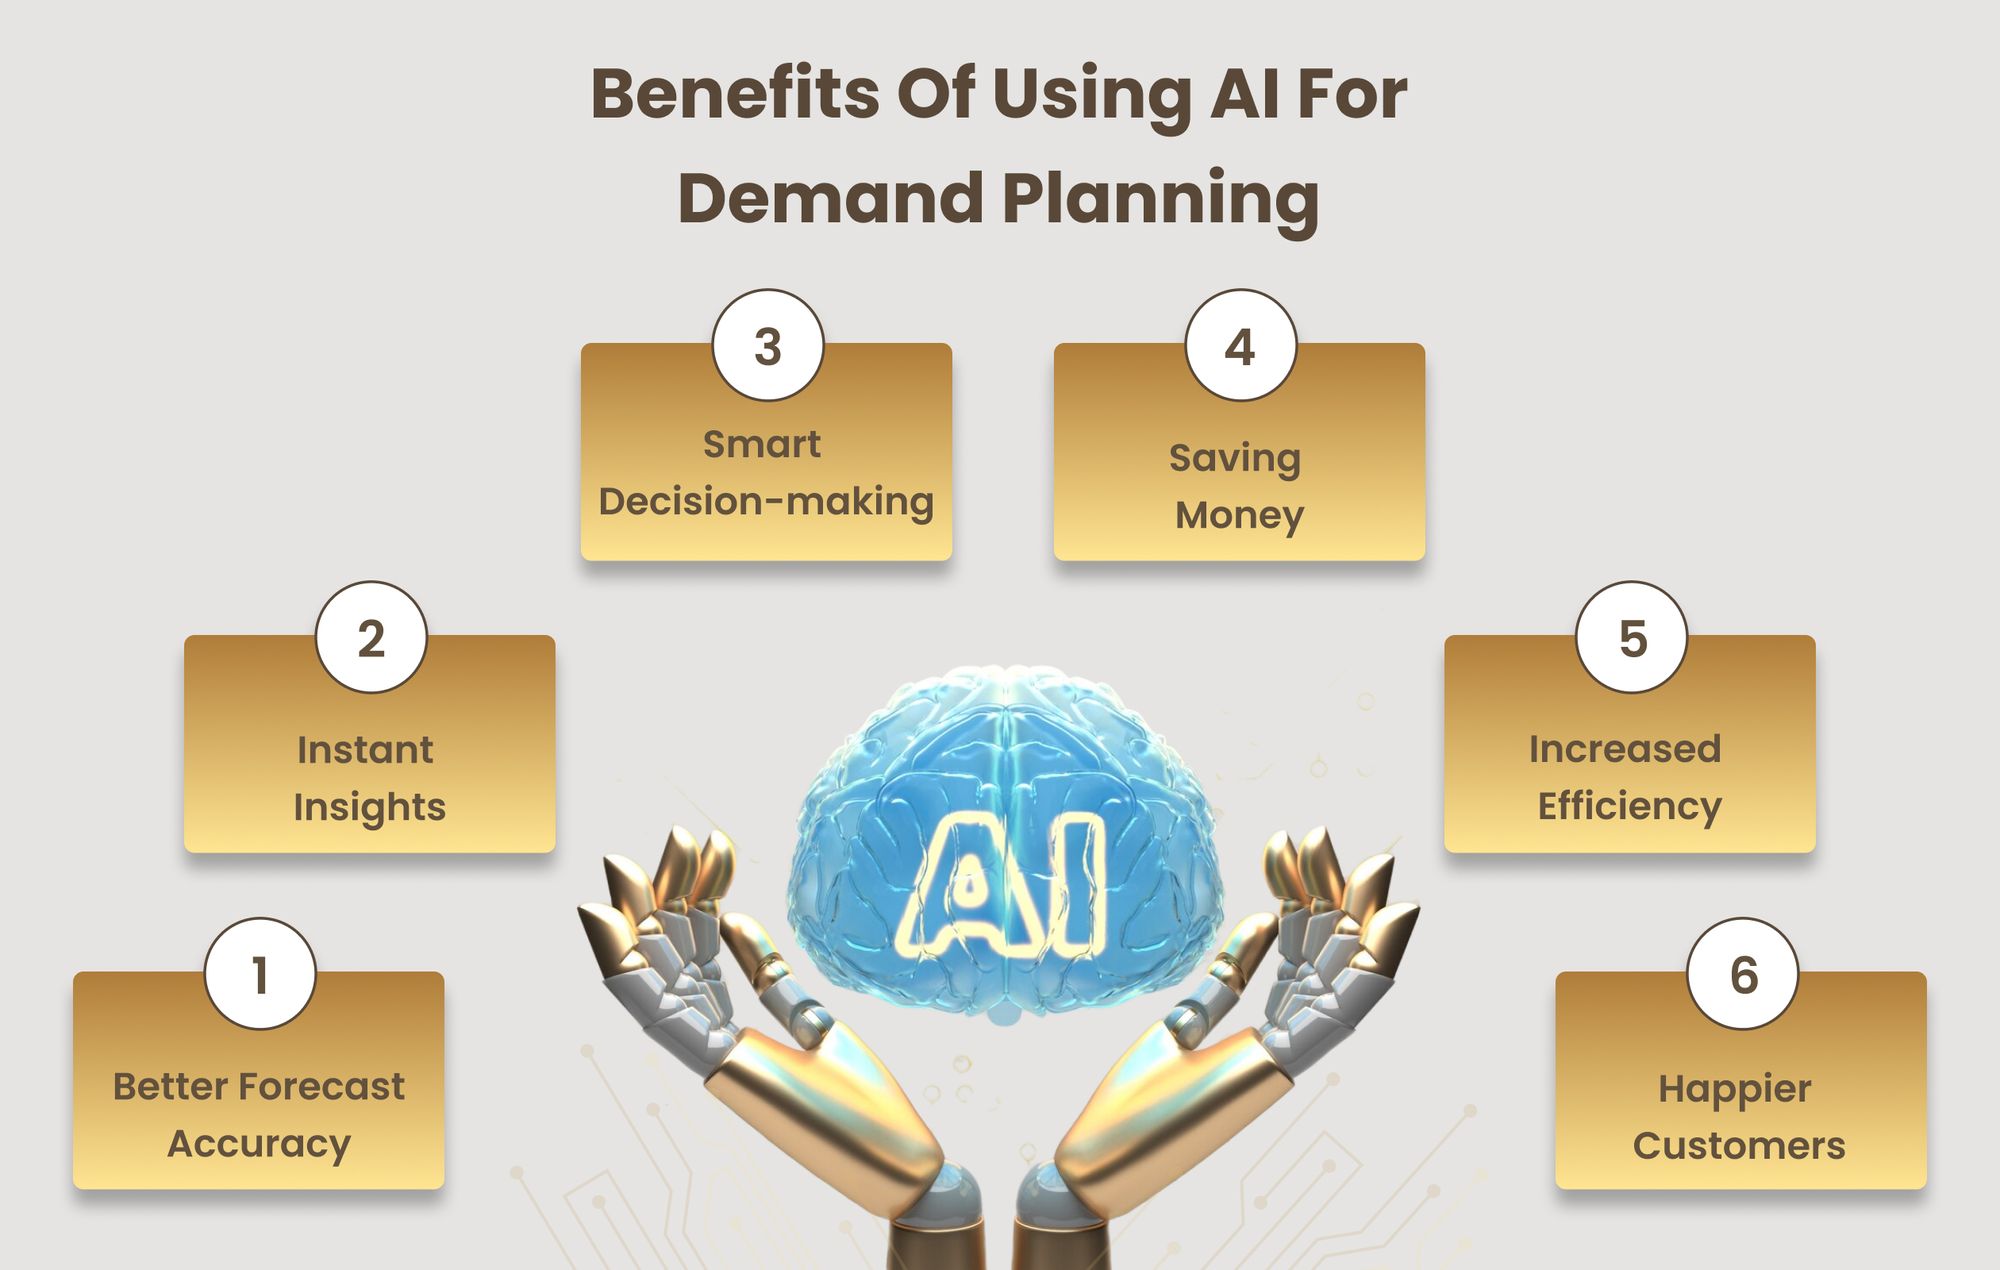 The benefits of using AI for Demand Planning